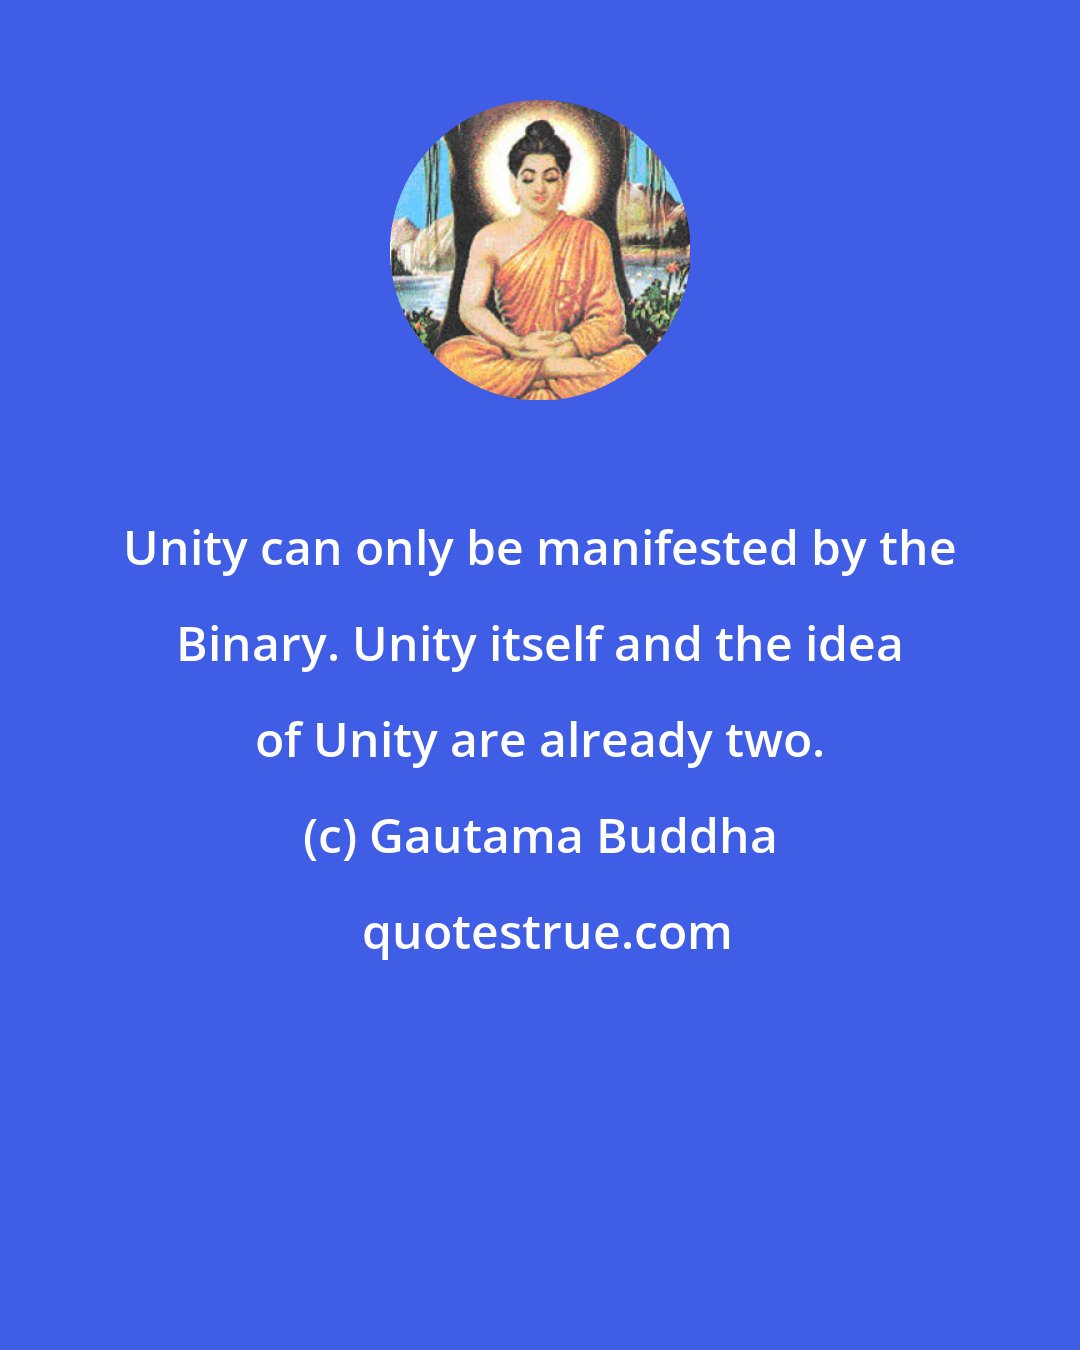 Gautama Buddha: Unity can only be manifested by the Binary. Unity itself and the idea of Unity are already two.